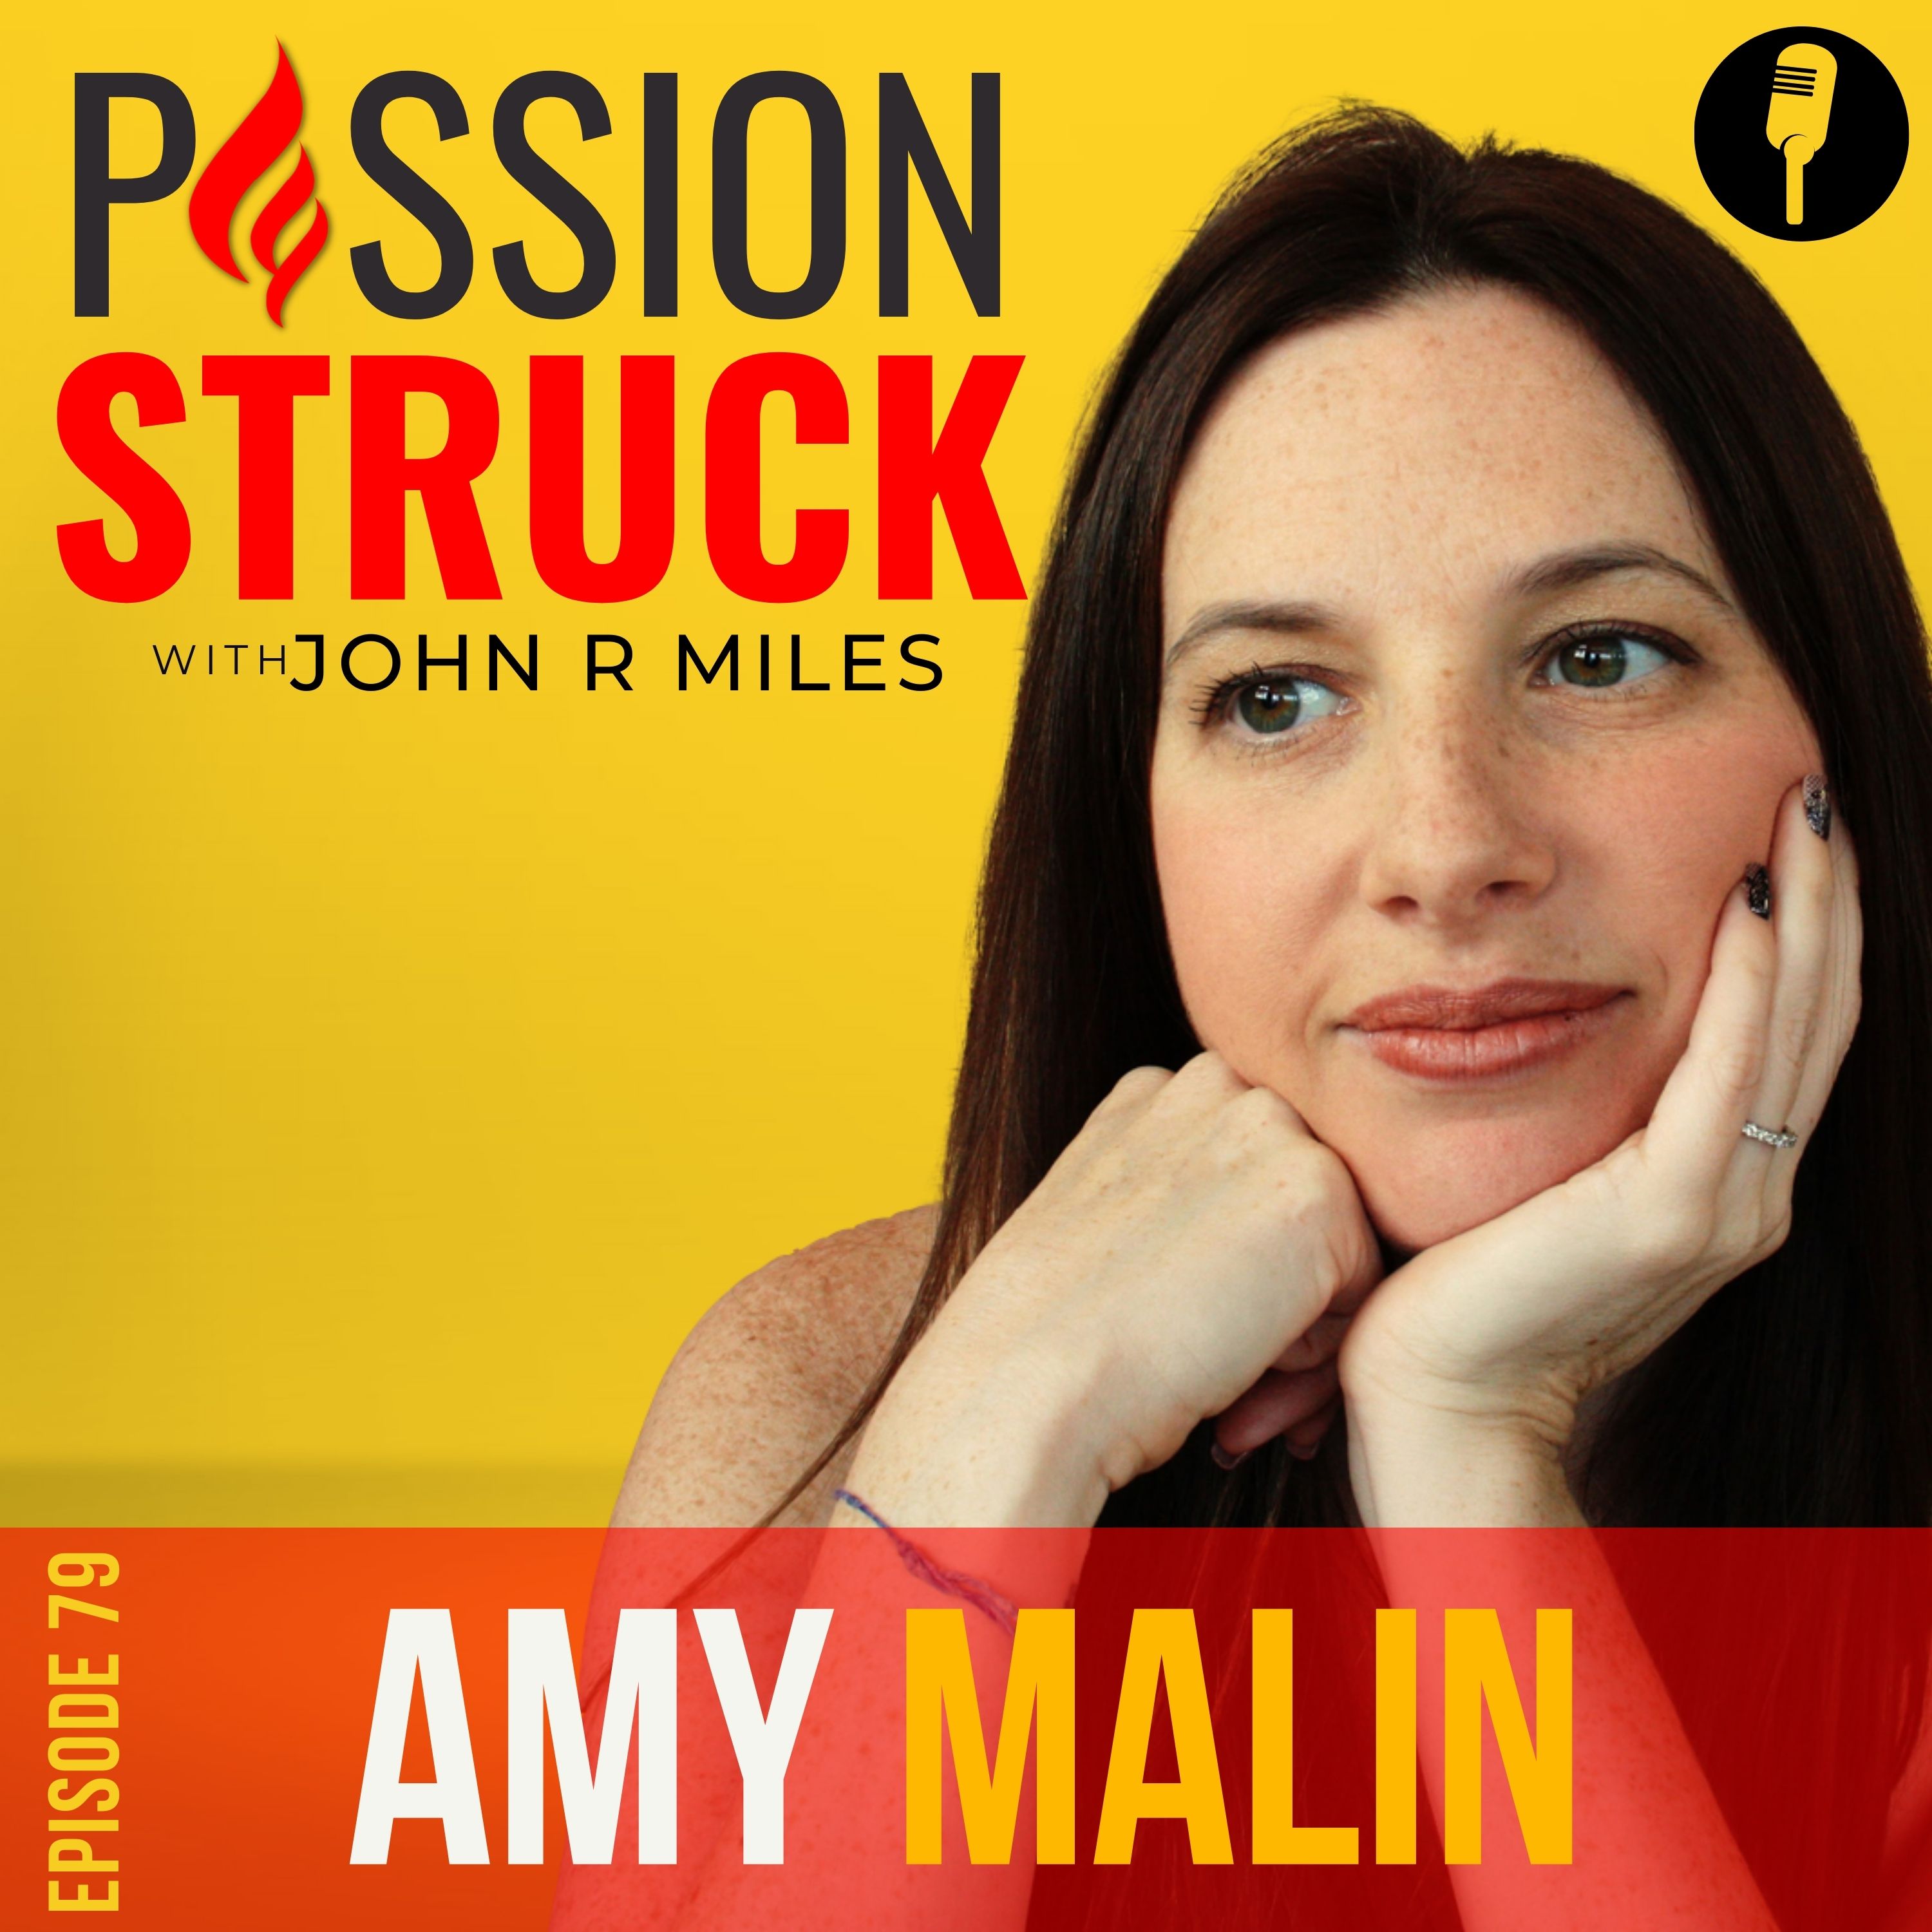 Passion Struck Podcast album cover with Amy MalinAmy